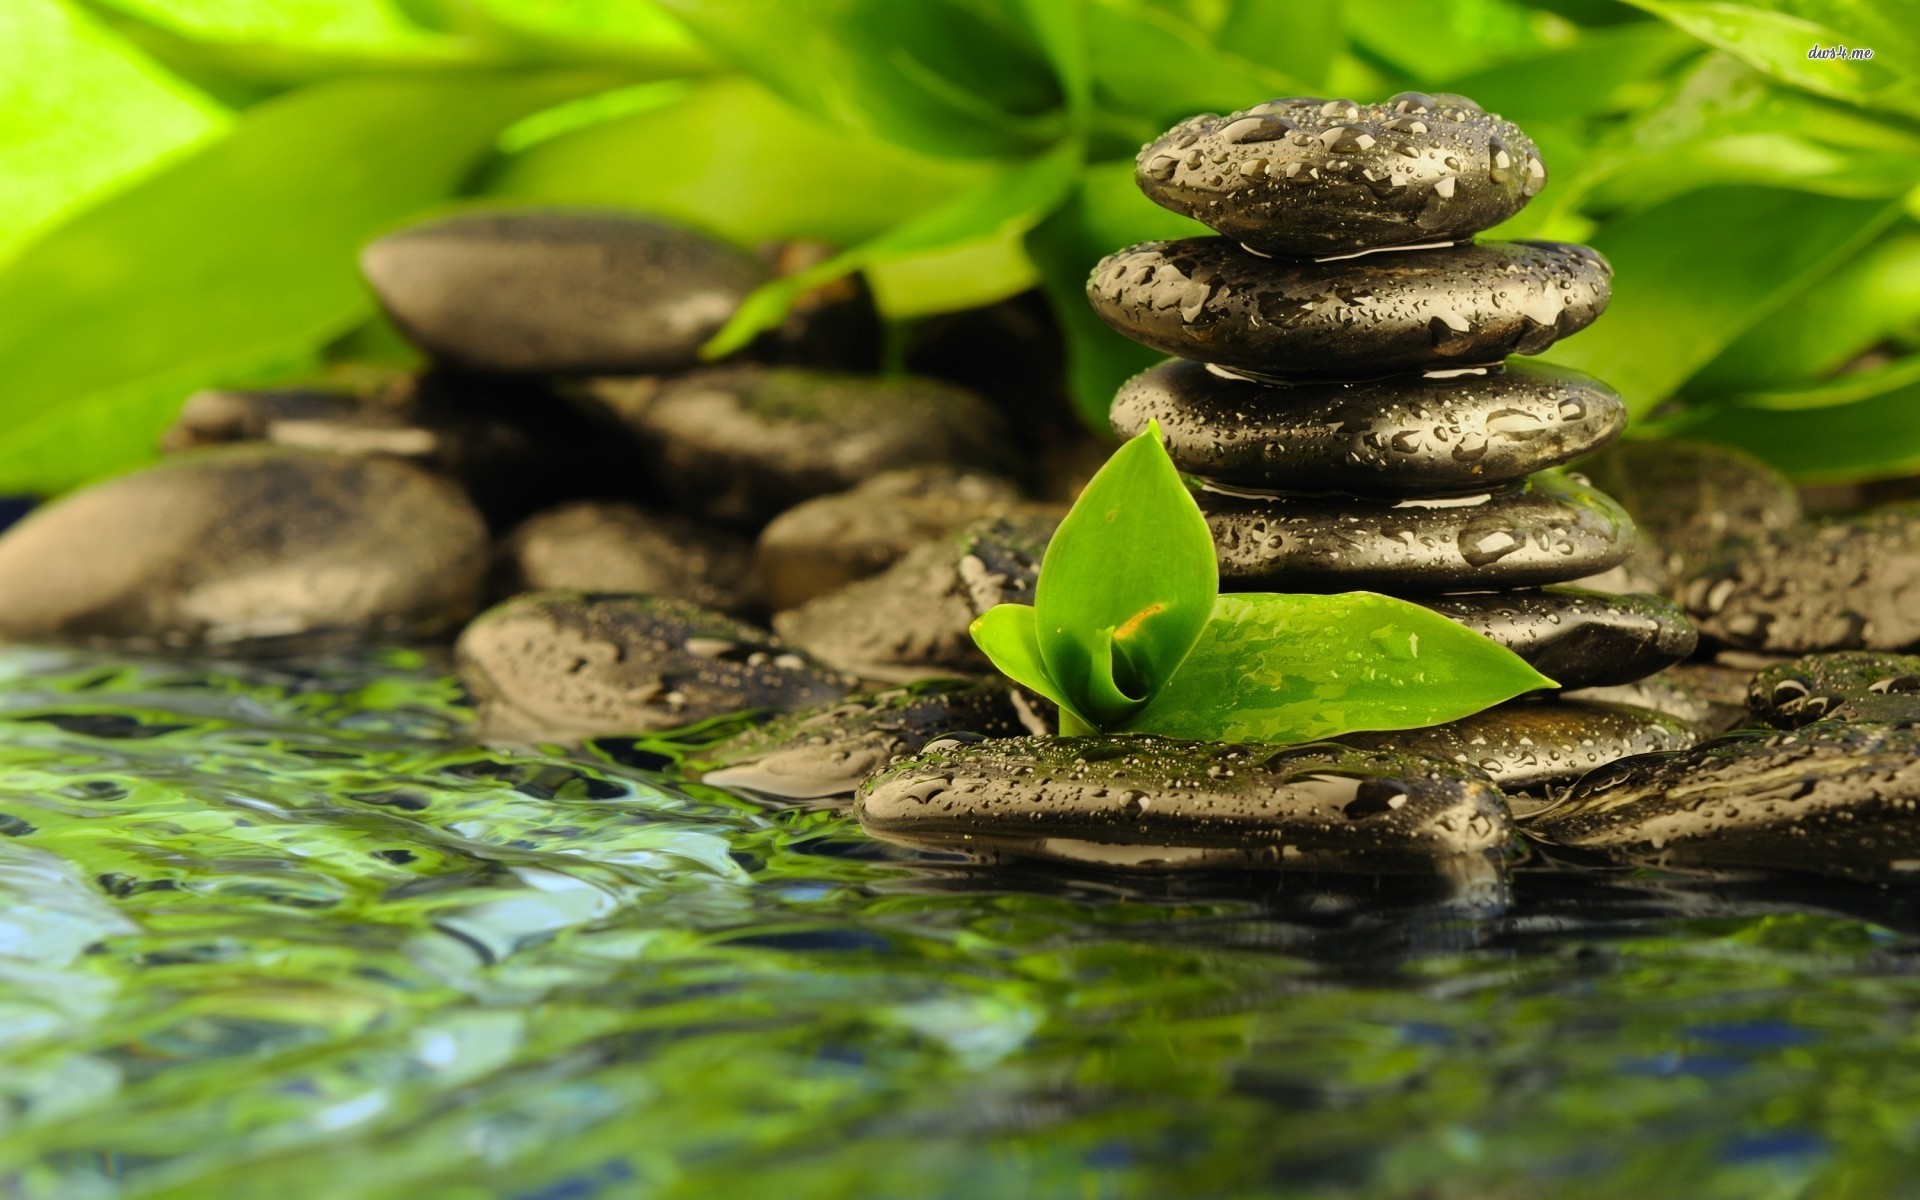  Zen  background    Download free stunning HD backgrounds  